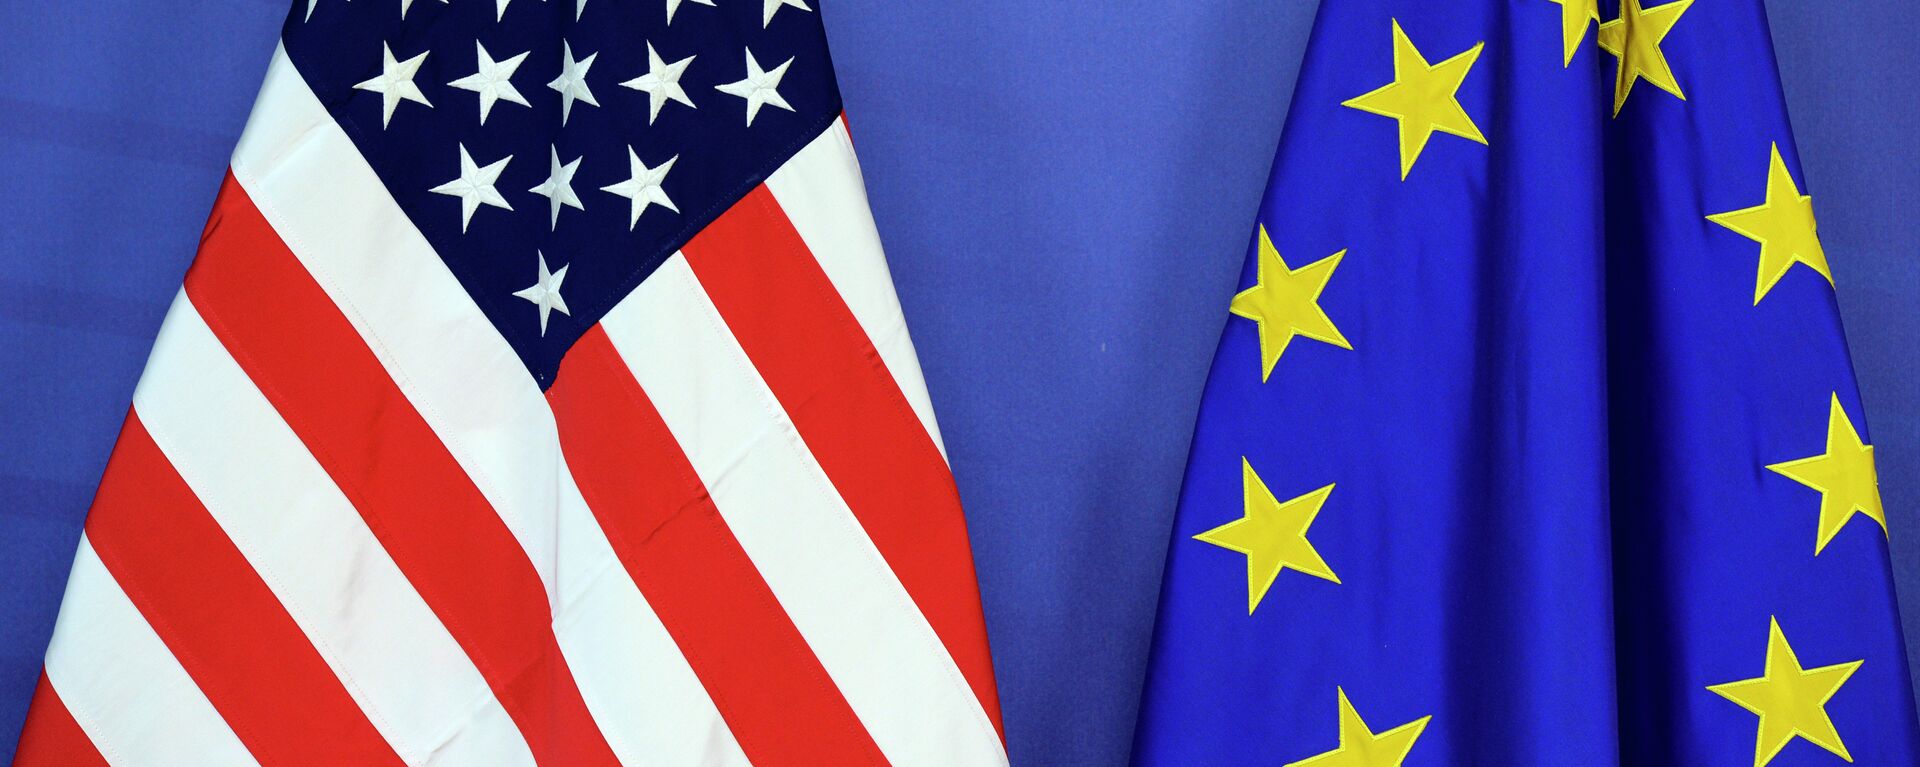 The US national flag (L) and the flag of the European Union are placed side-by-side during the Transatlantic Trade and Investment Partnership (TTIP) meeting at the European Union Commission headquarter in Brussels, on July 13, 2015 - Sputnik Mundo, 1920, 07.12.2022